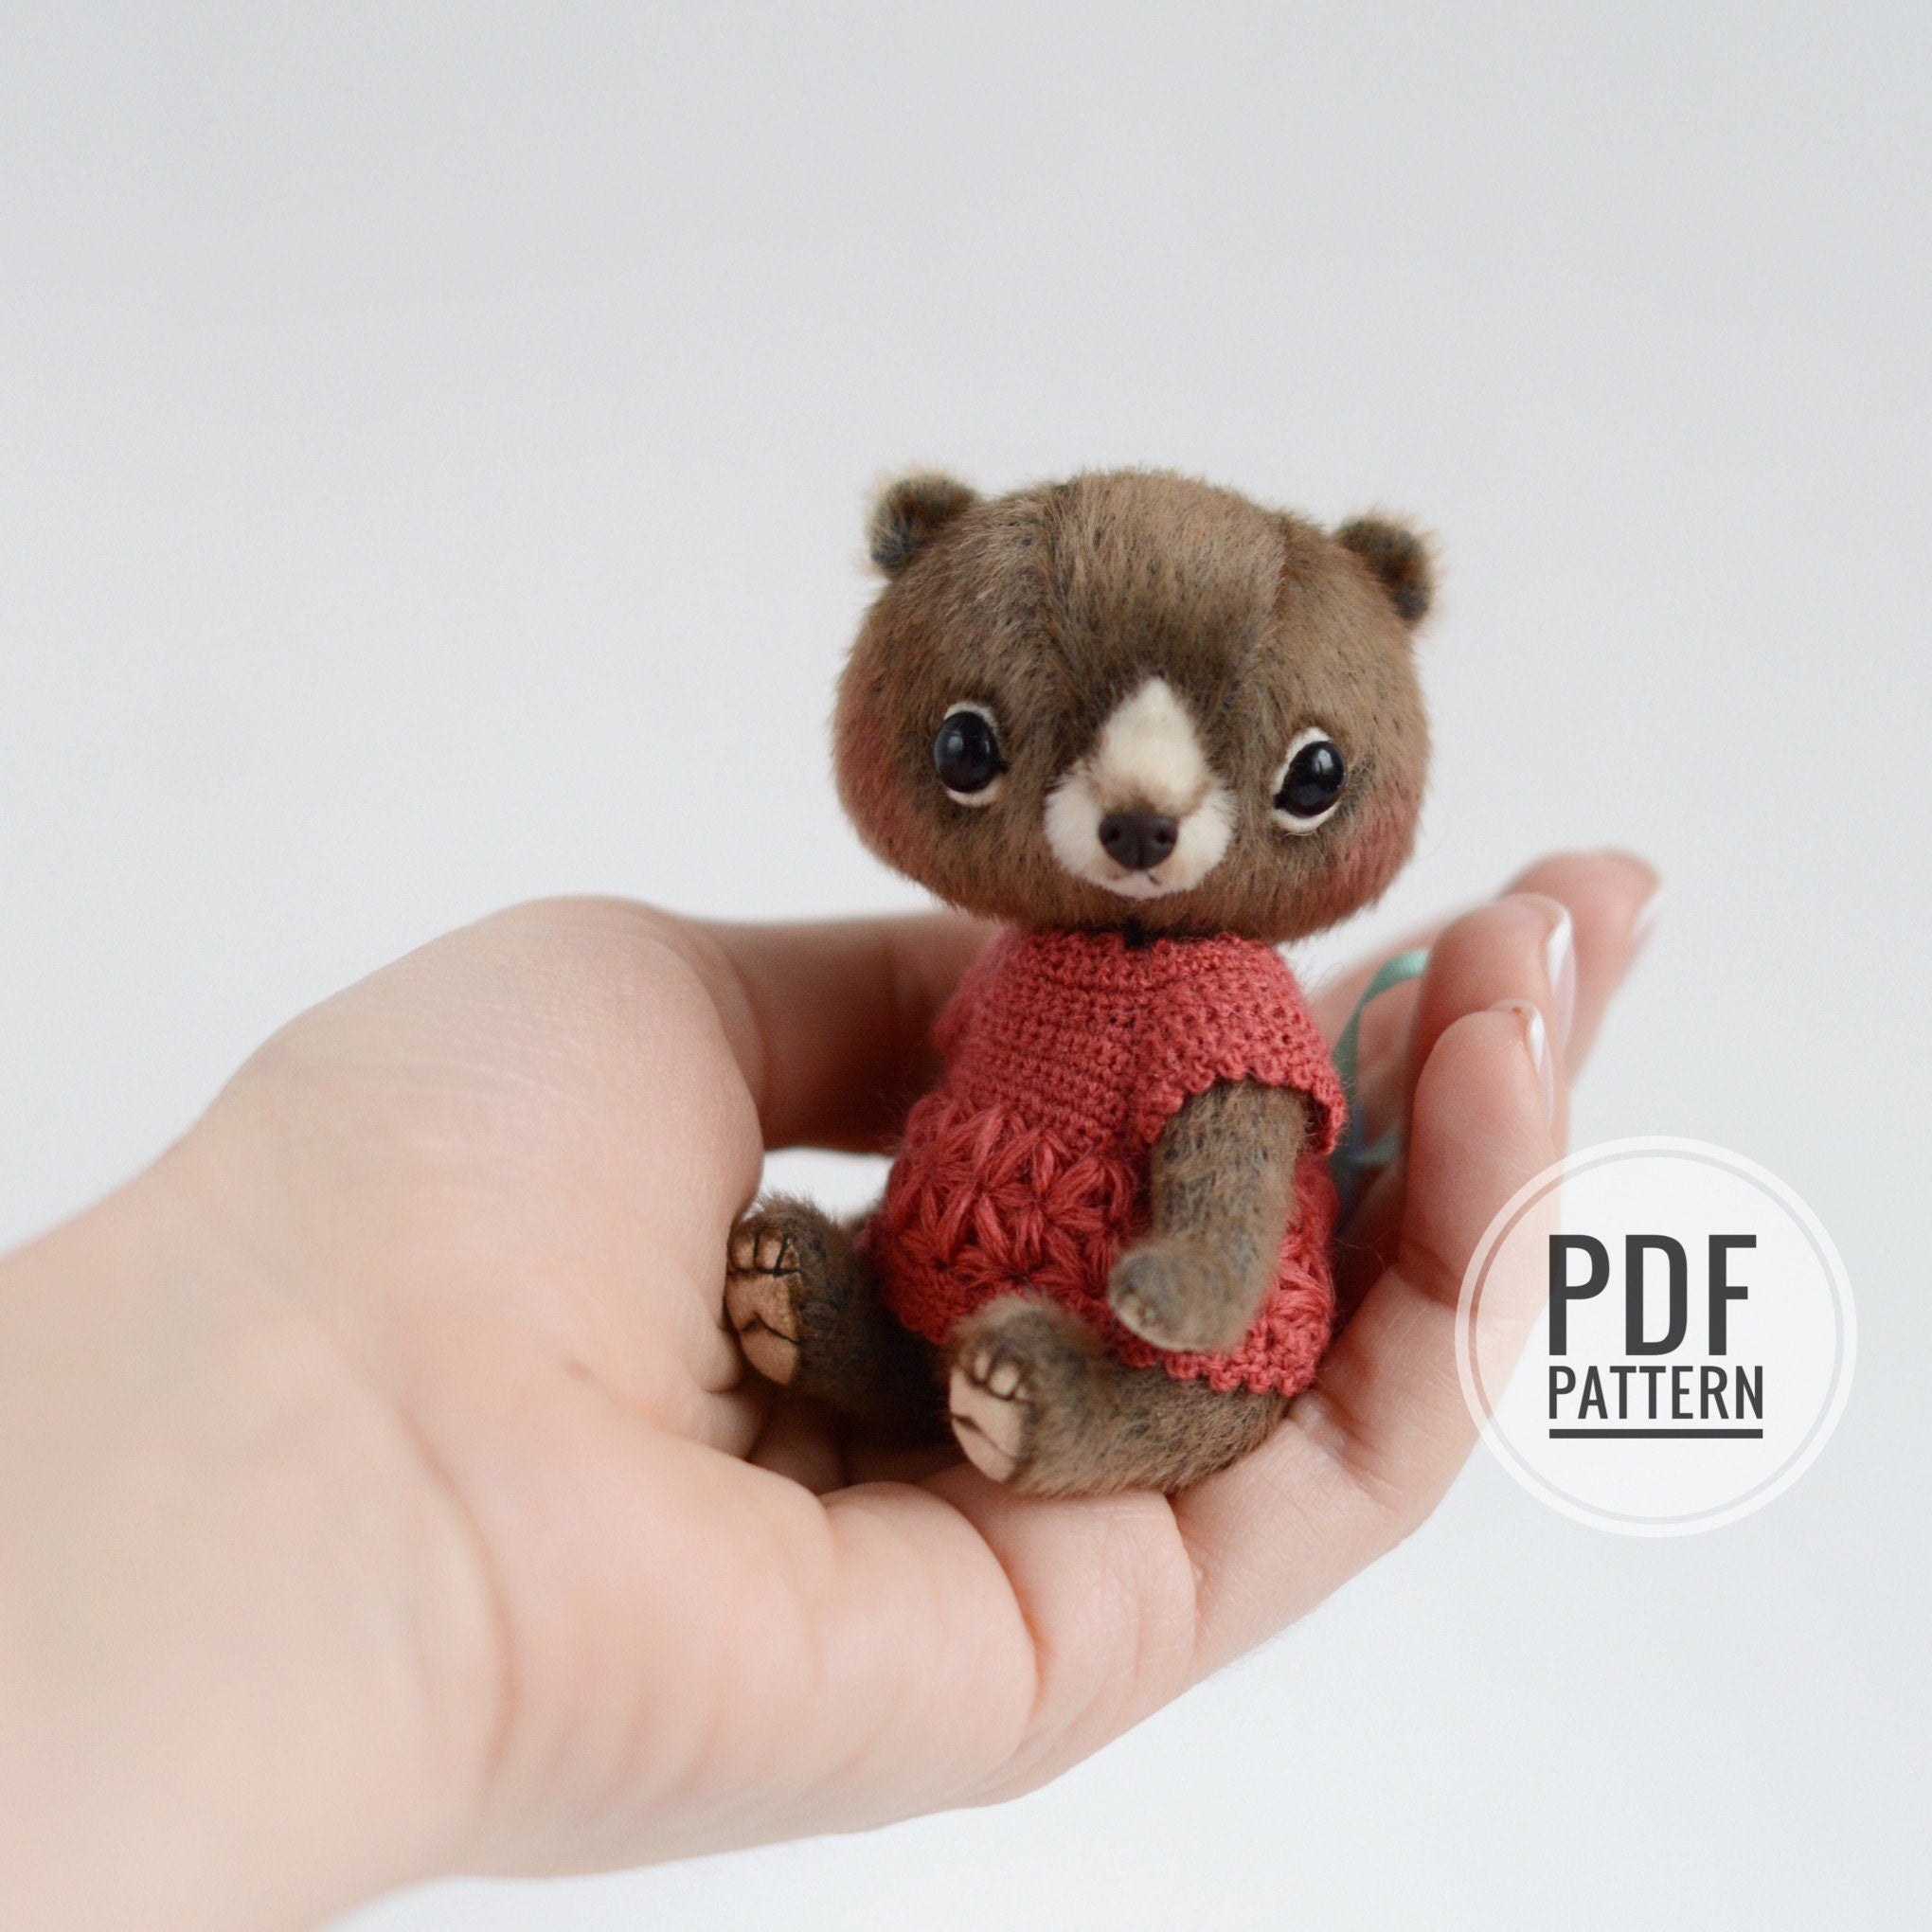 Miniature Teddy Bear PATTERN PDF text instructions, easy teddy bear pattern for beginners, how to sew traditional bear